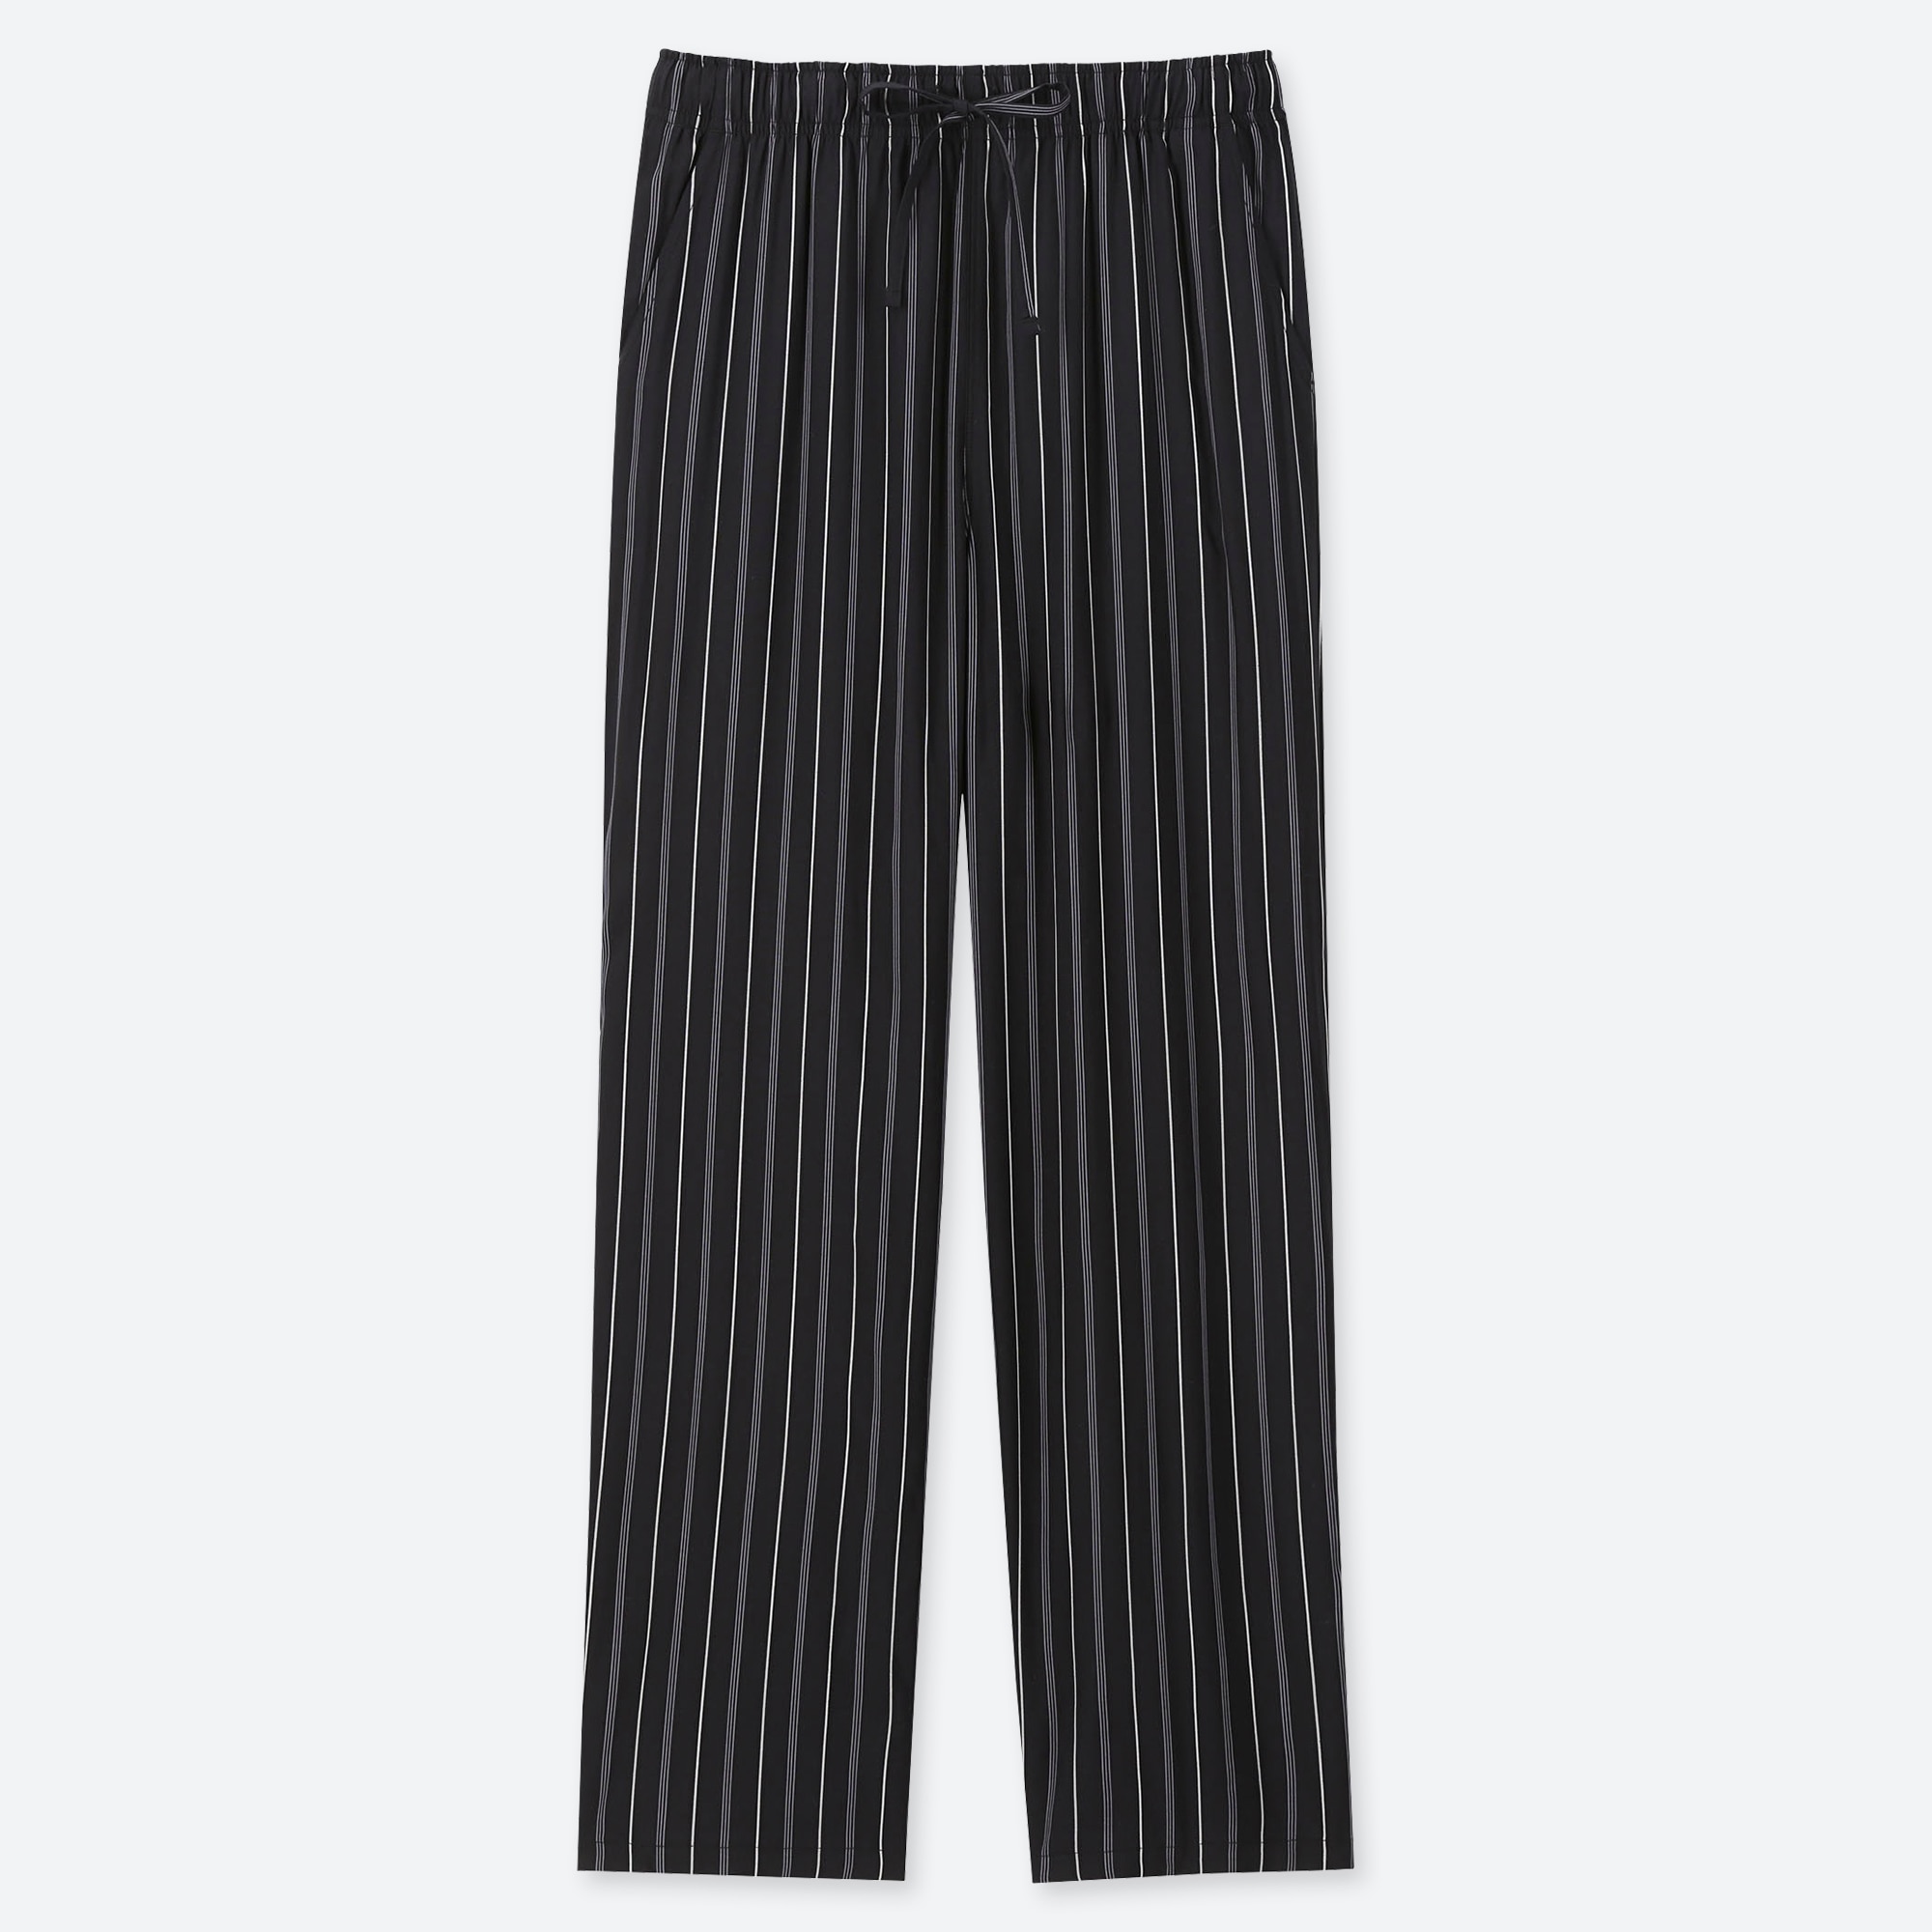 gray and black striped pants